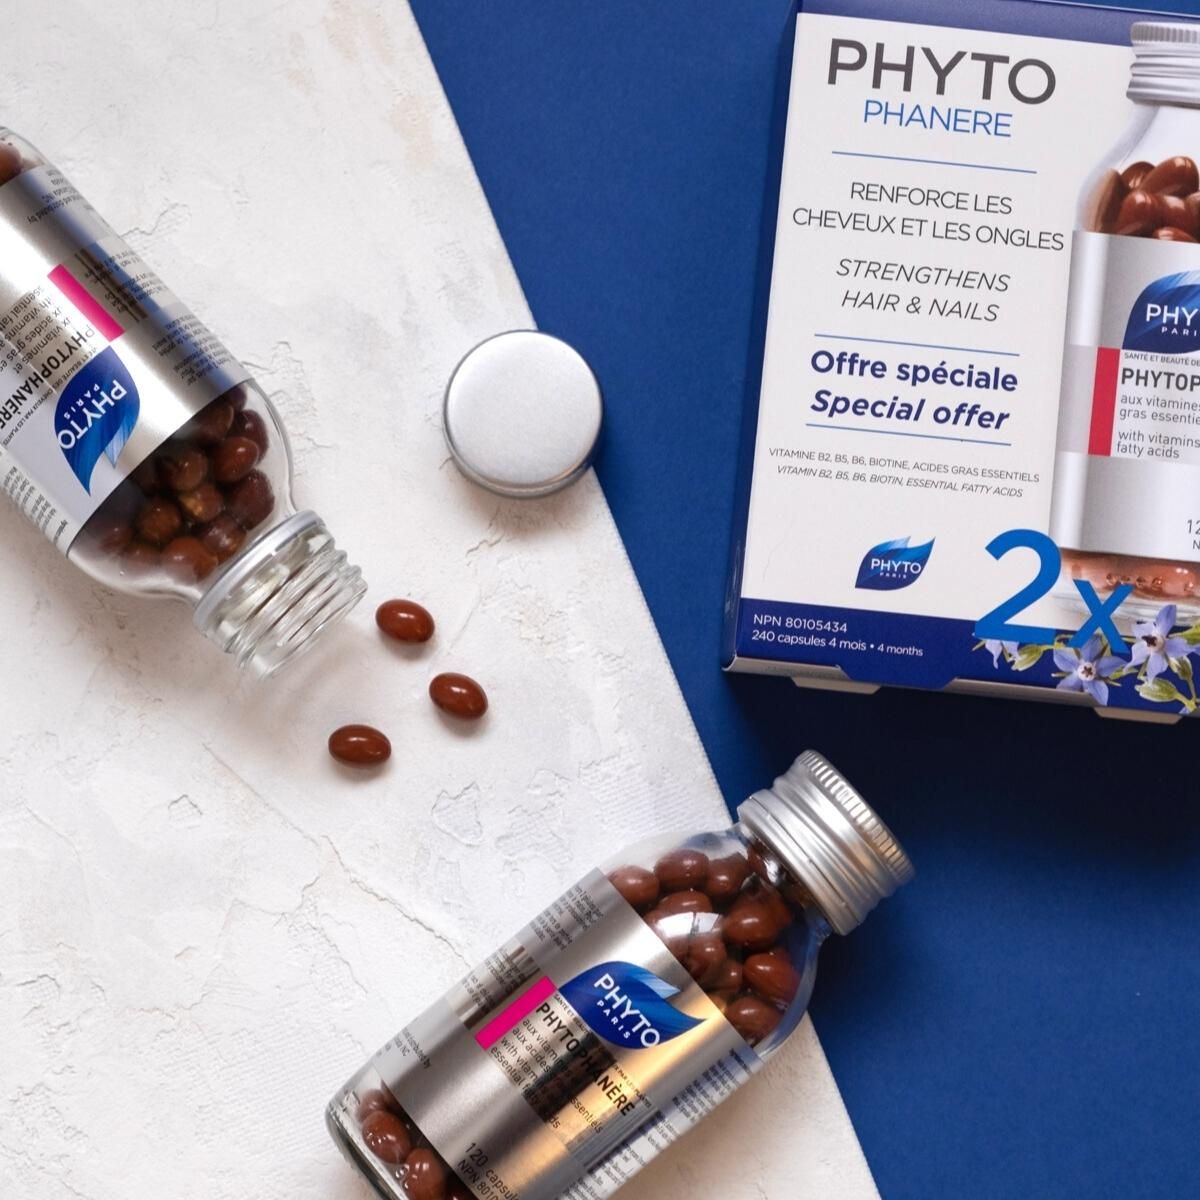 PHYTOPHANERE DUO - Vitamins and Essential Fatty Acids